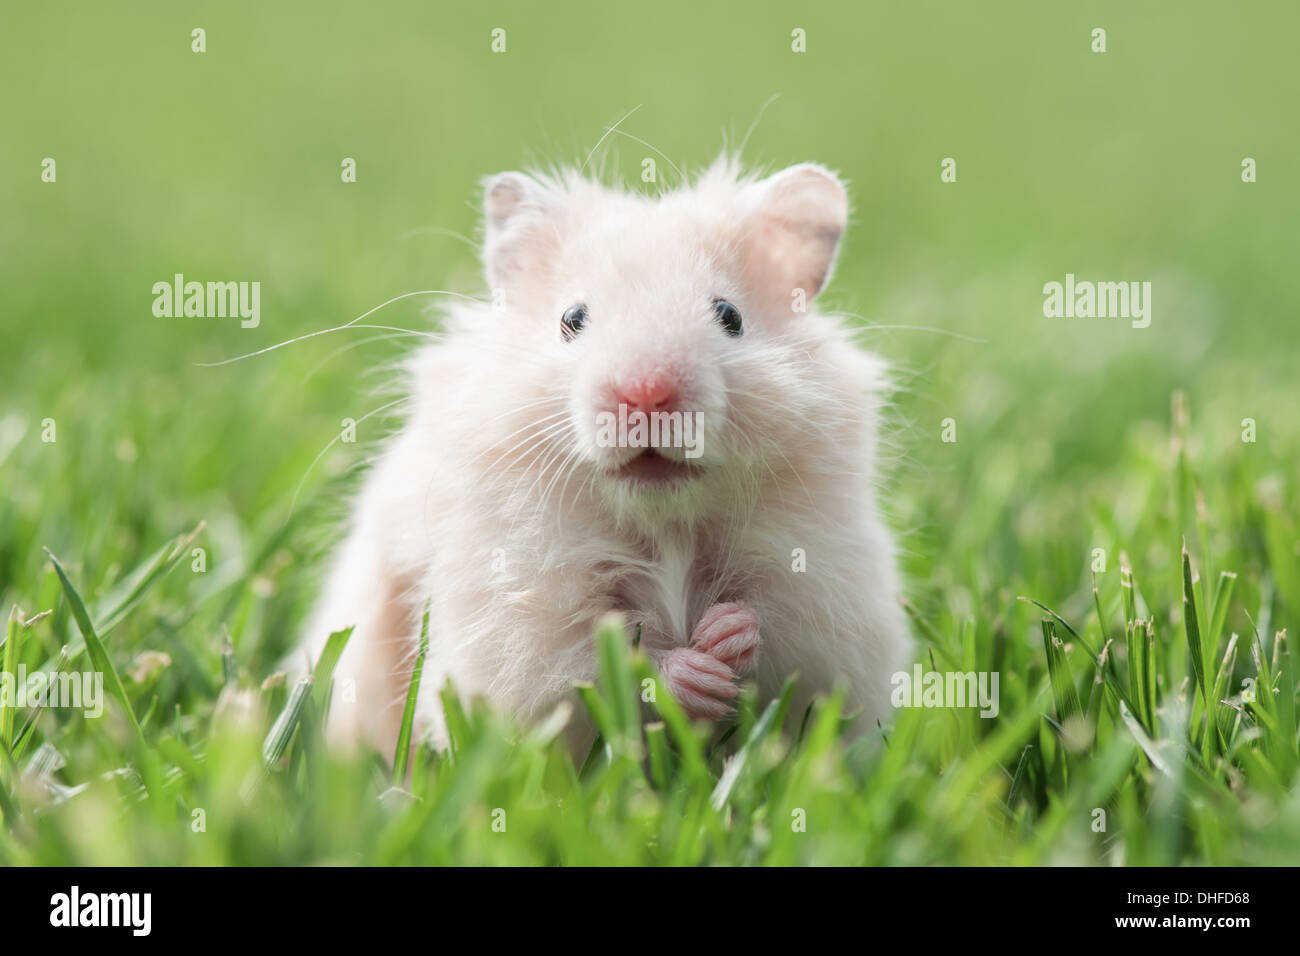 white hamster on lawn closeup Stock Photo